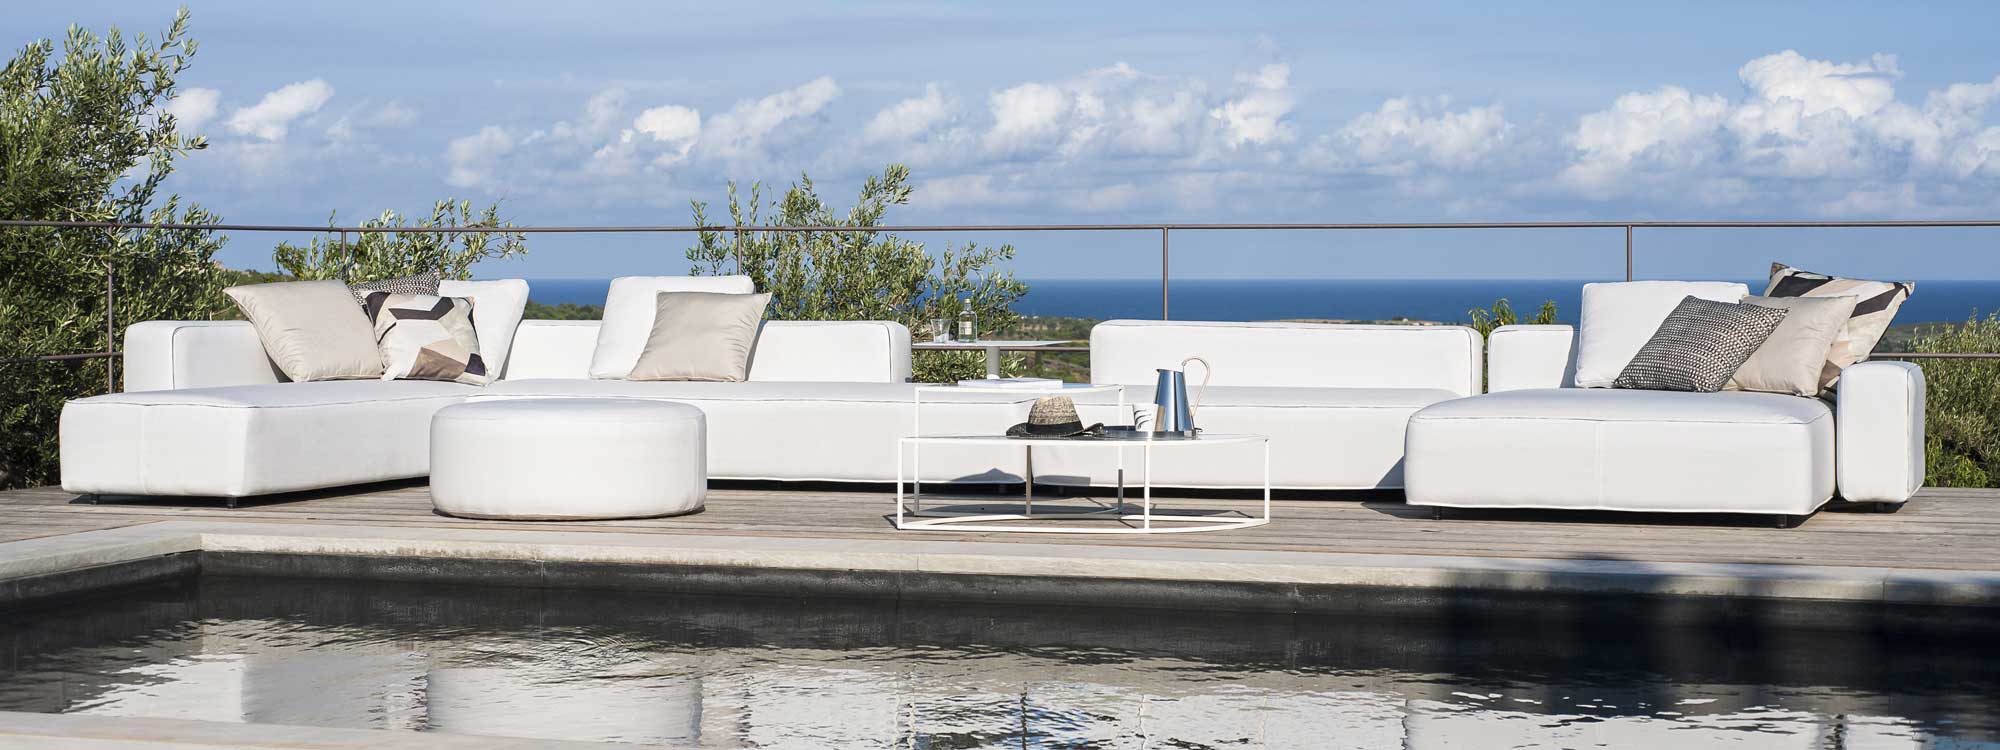 Large installation of white Dandy garden sofa next to swimming pool with sea in the background